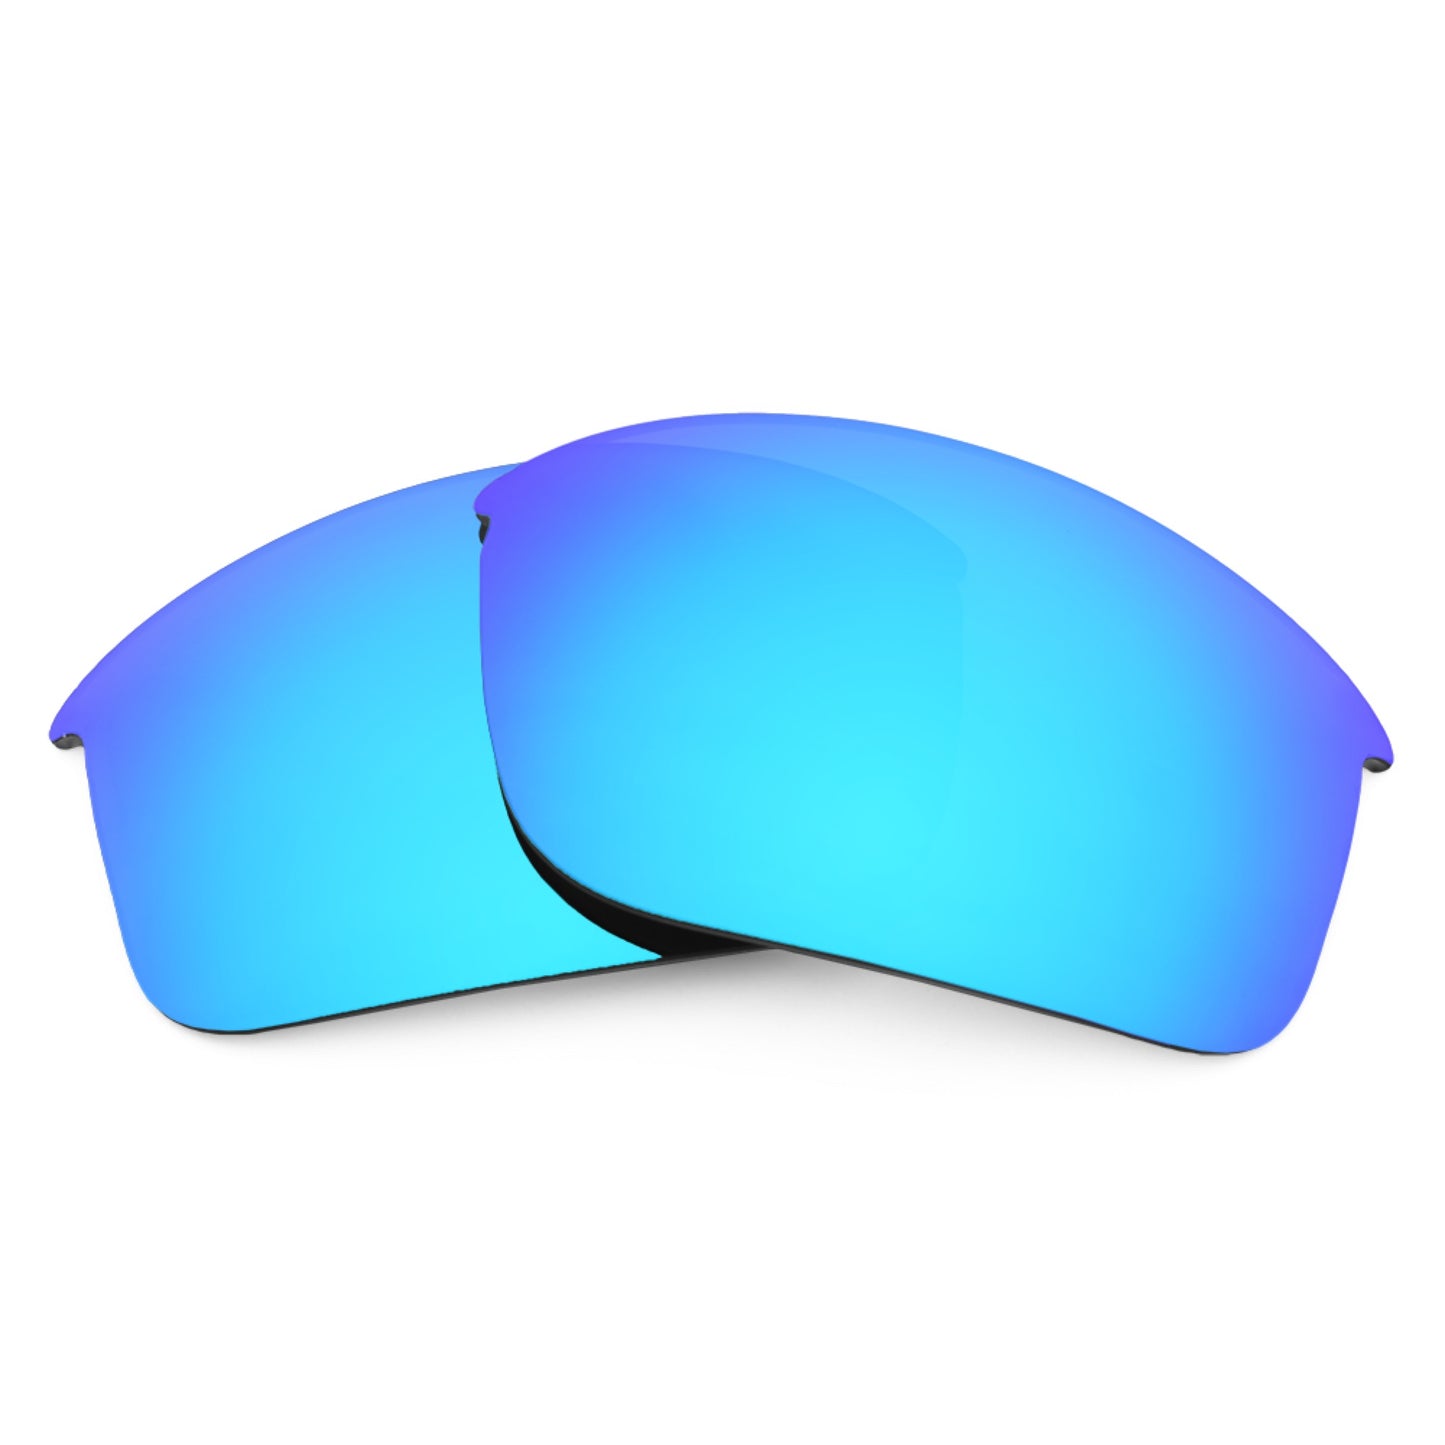 Revant replacement lenses for Under Armour Octane Non-Polarized Ice Blue